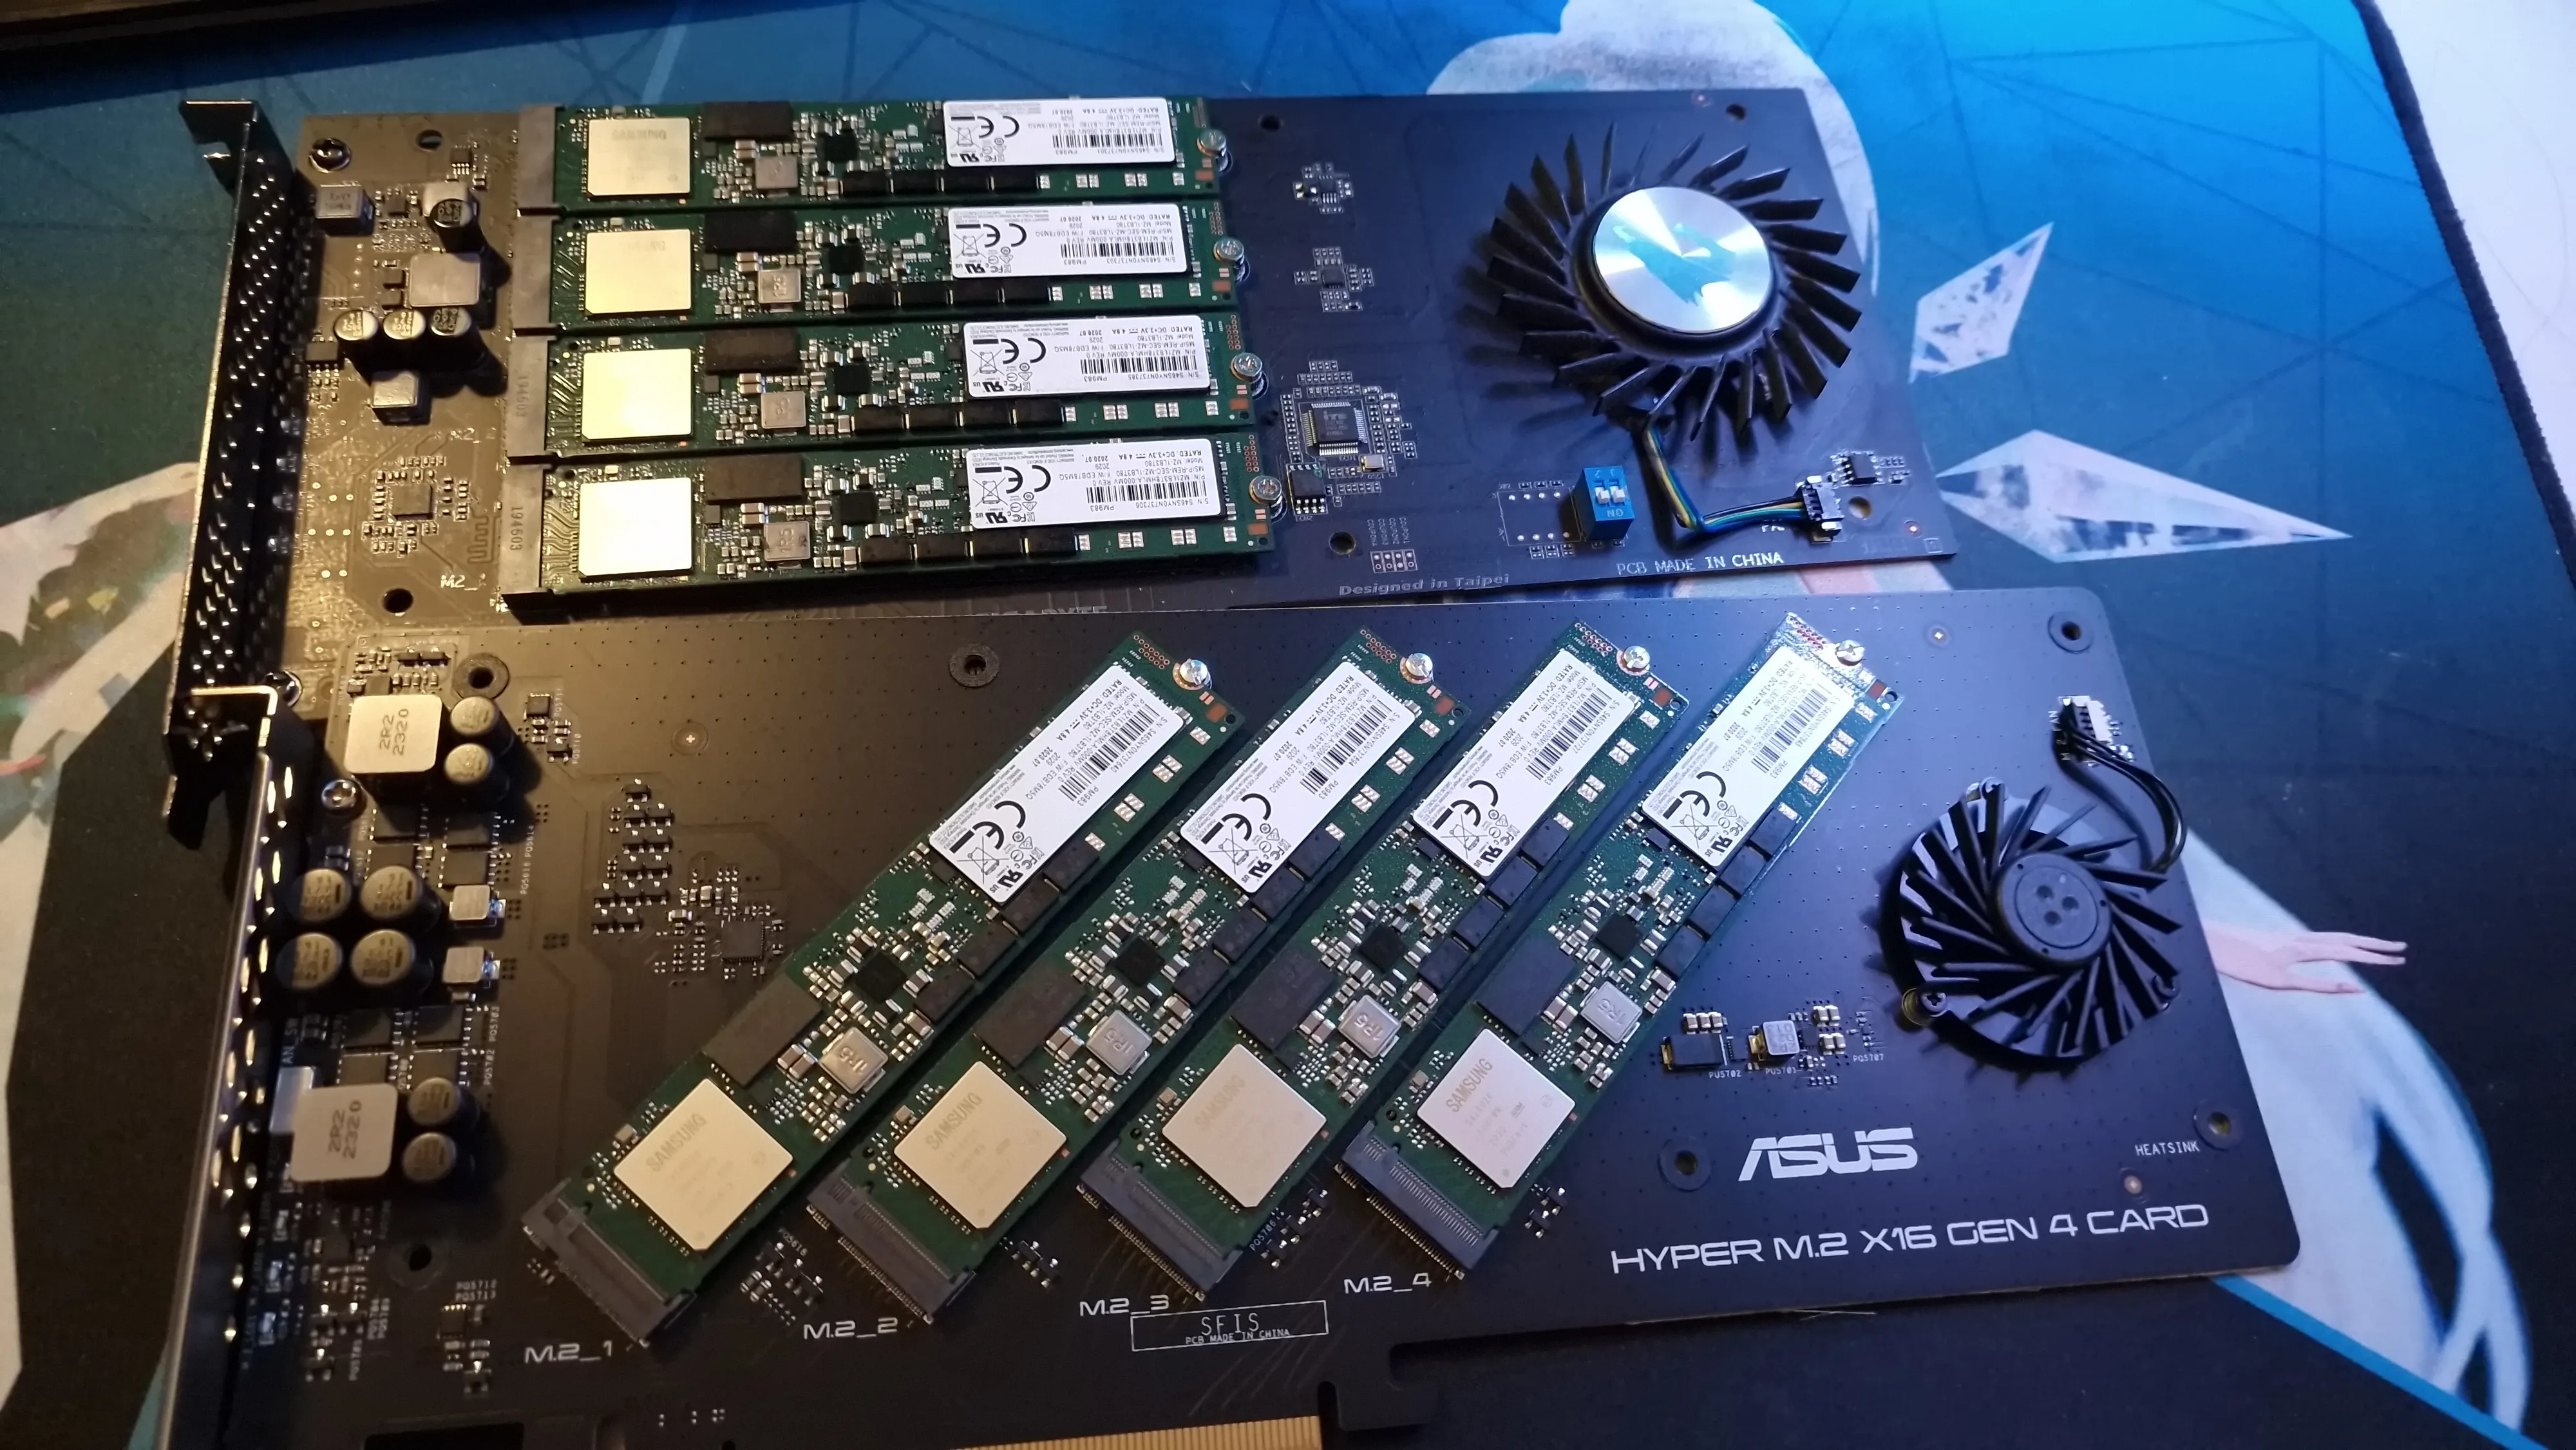 All 8 SSDs slotted in AIC carriers